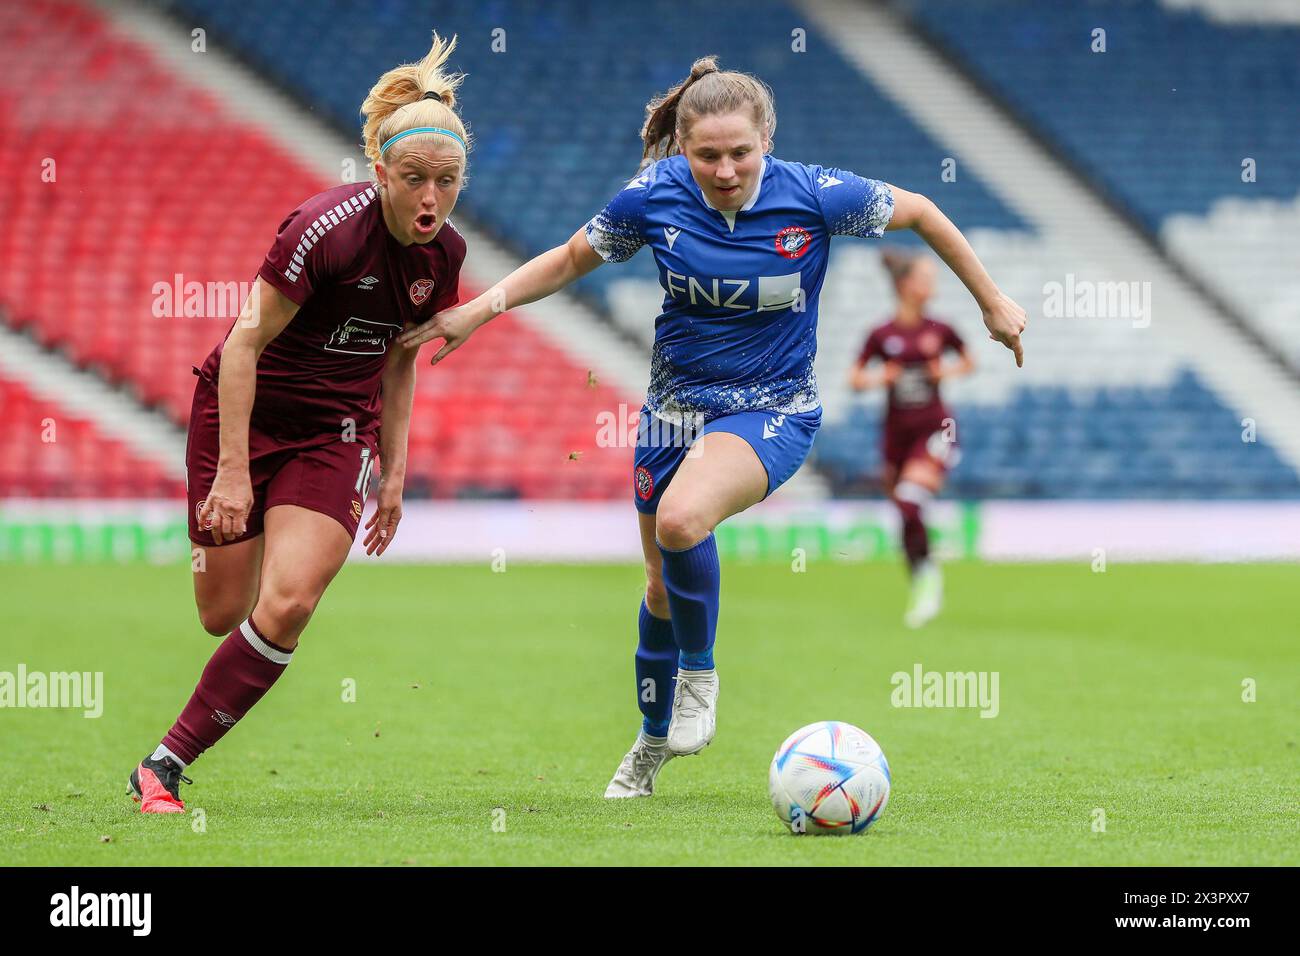 Glasgow, UK. 28th Apr, 2024. Spartans play Heart of Midlothian at Hampden park, Glasgow, Scotland, UK in the semi-final of the Women's Scottish Cup. The winner of this match will play Rangers in the final on Saturday 25 May at Hampden Park. Credit: Findlay/Alamy Live News Stock Photo